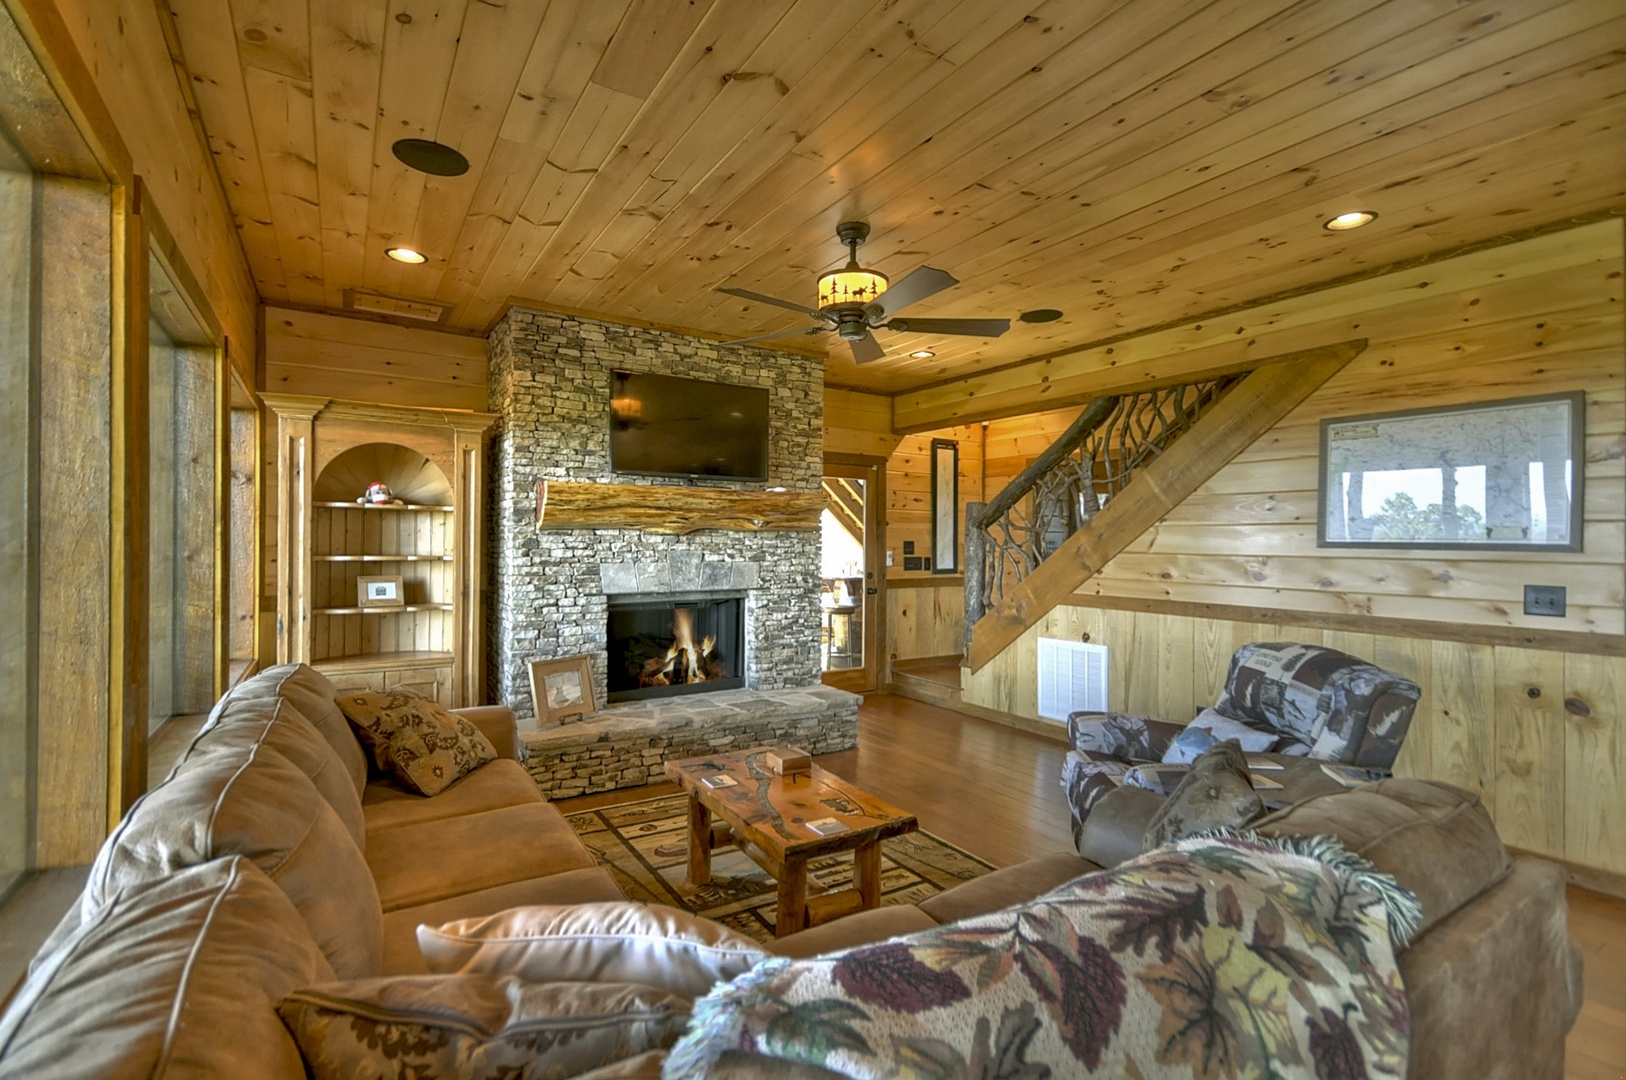 The Vue Over Blue Ridge- Lower level living area with a fireplace and TV